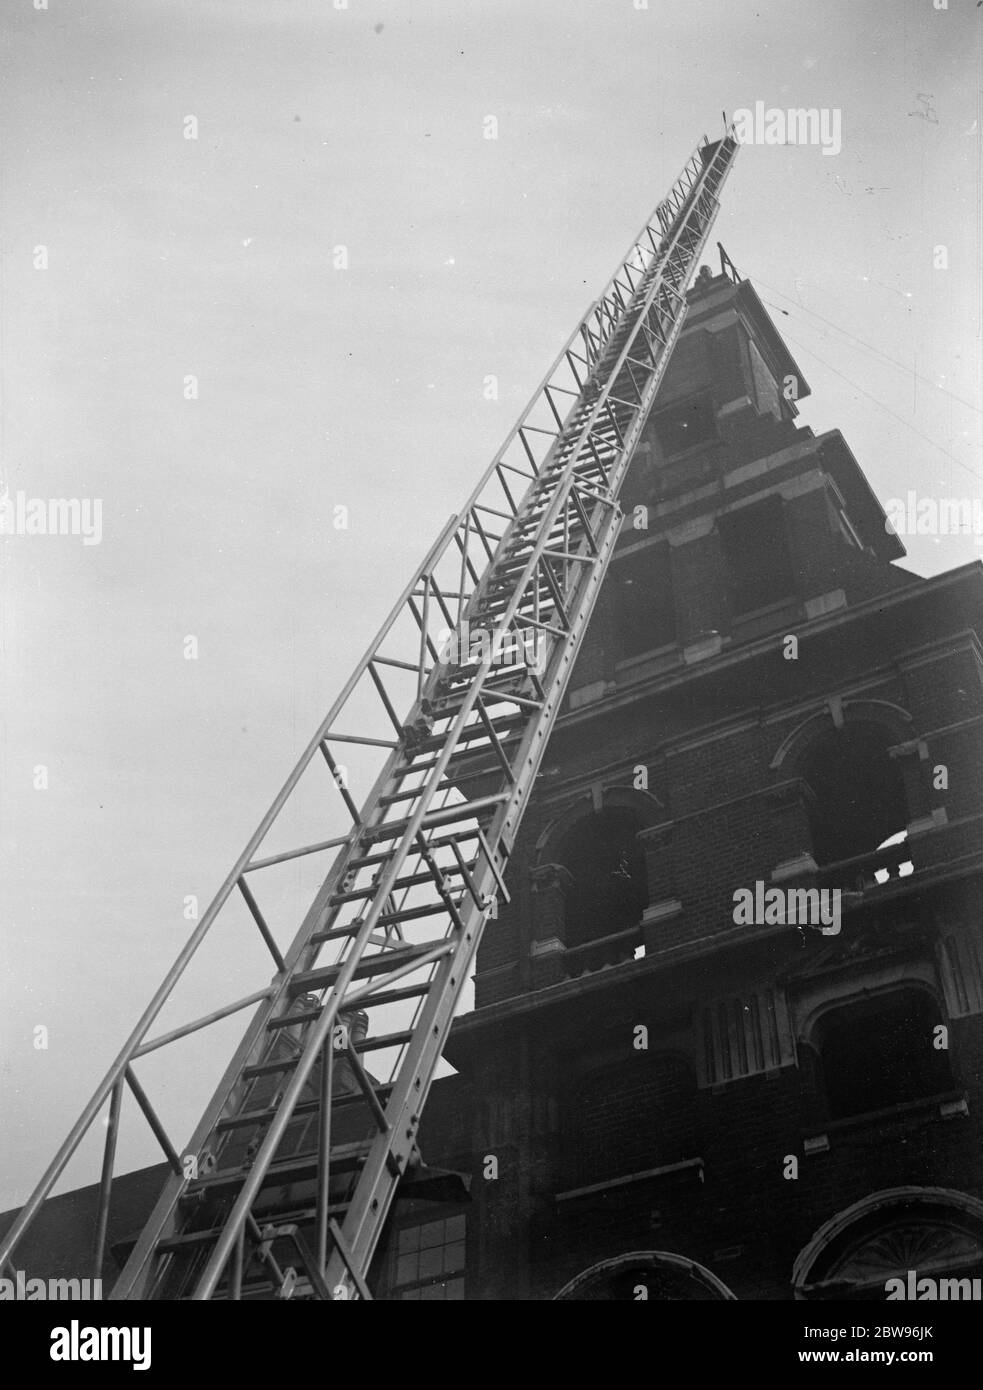 World 's largest fire escape tested by London fire brigade . A turntable fire escape to reach a height of 104 feet , said to be the largest in the world , was tested out by the London fire brigade at their Soutwark headquarters . The new escape was made in Manchester . Testing out the new fire escape at Southwark . 24 March 1932 Stock Photo